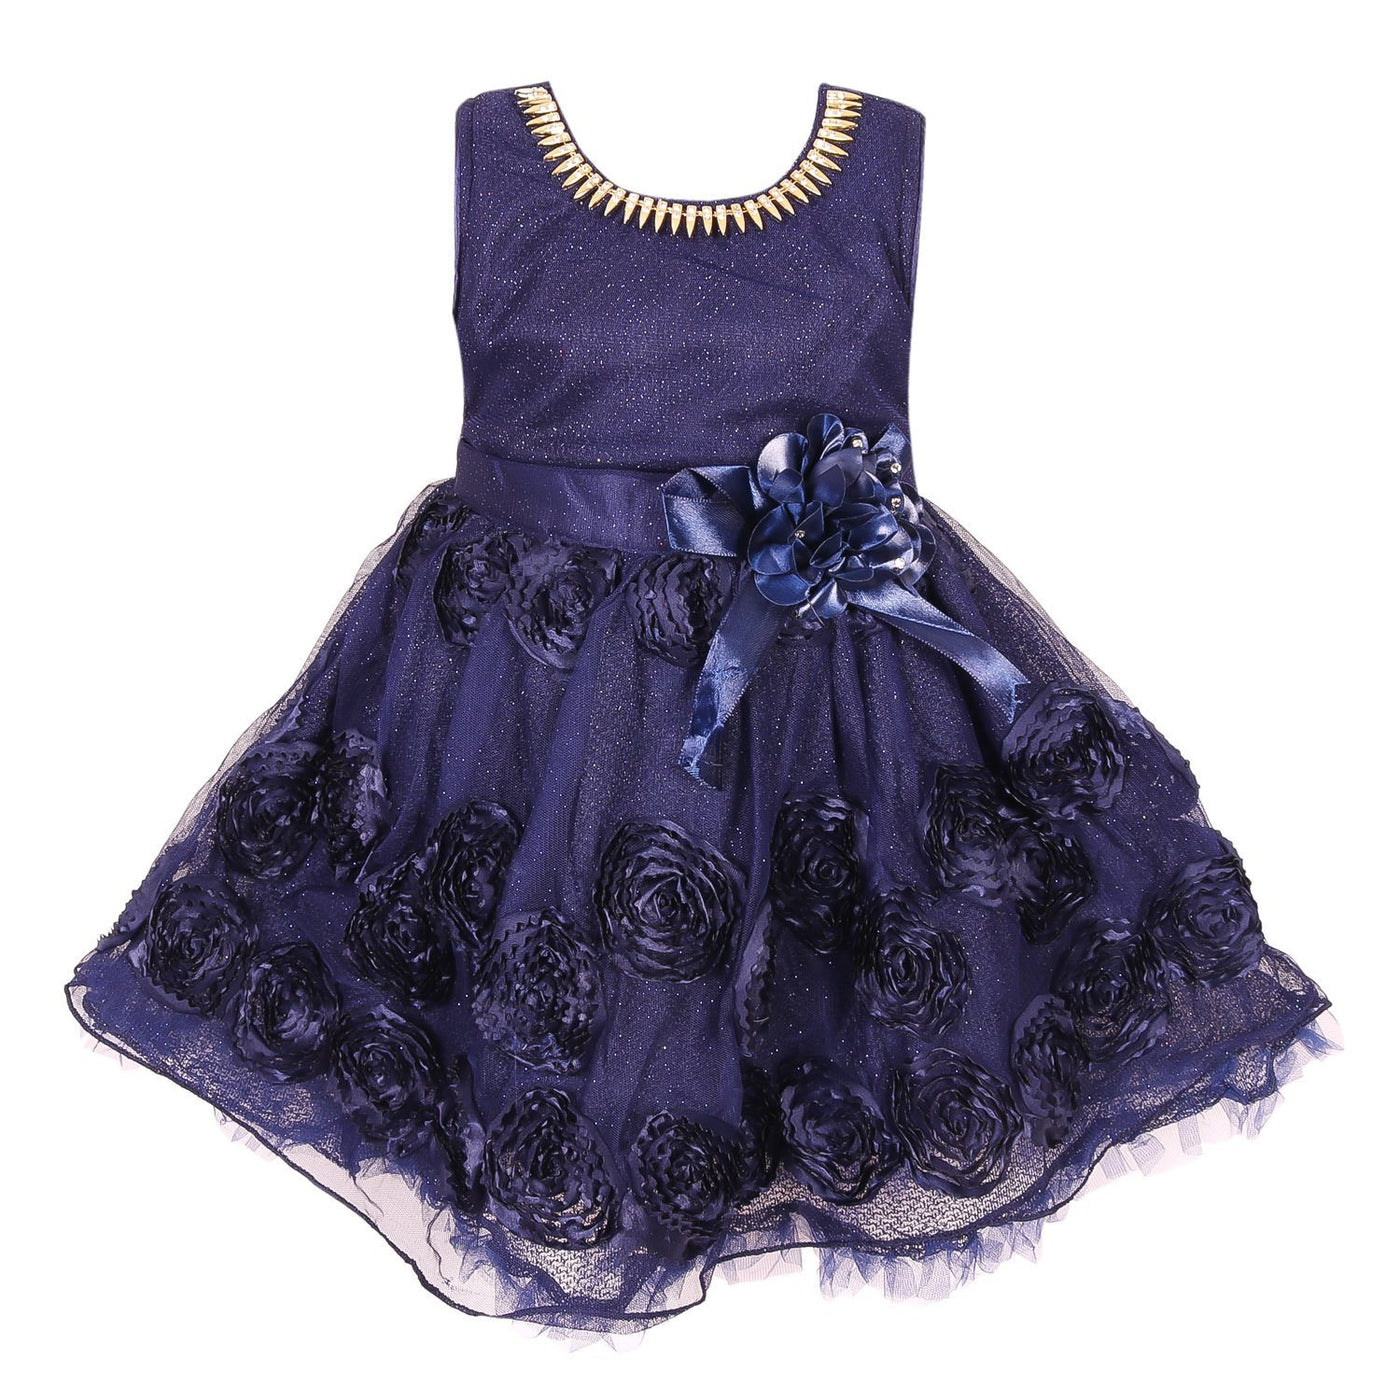 party wear frocks for baby girl